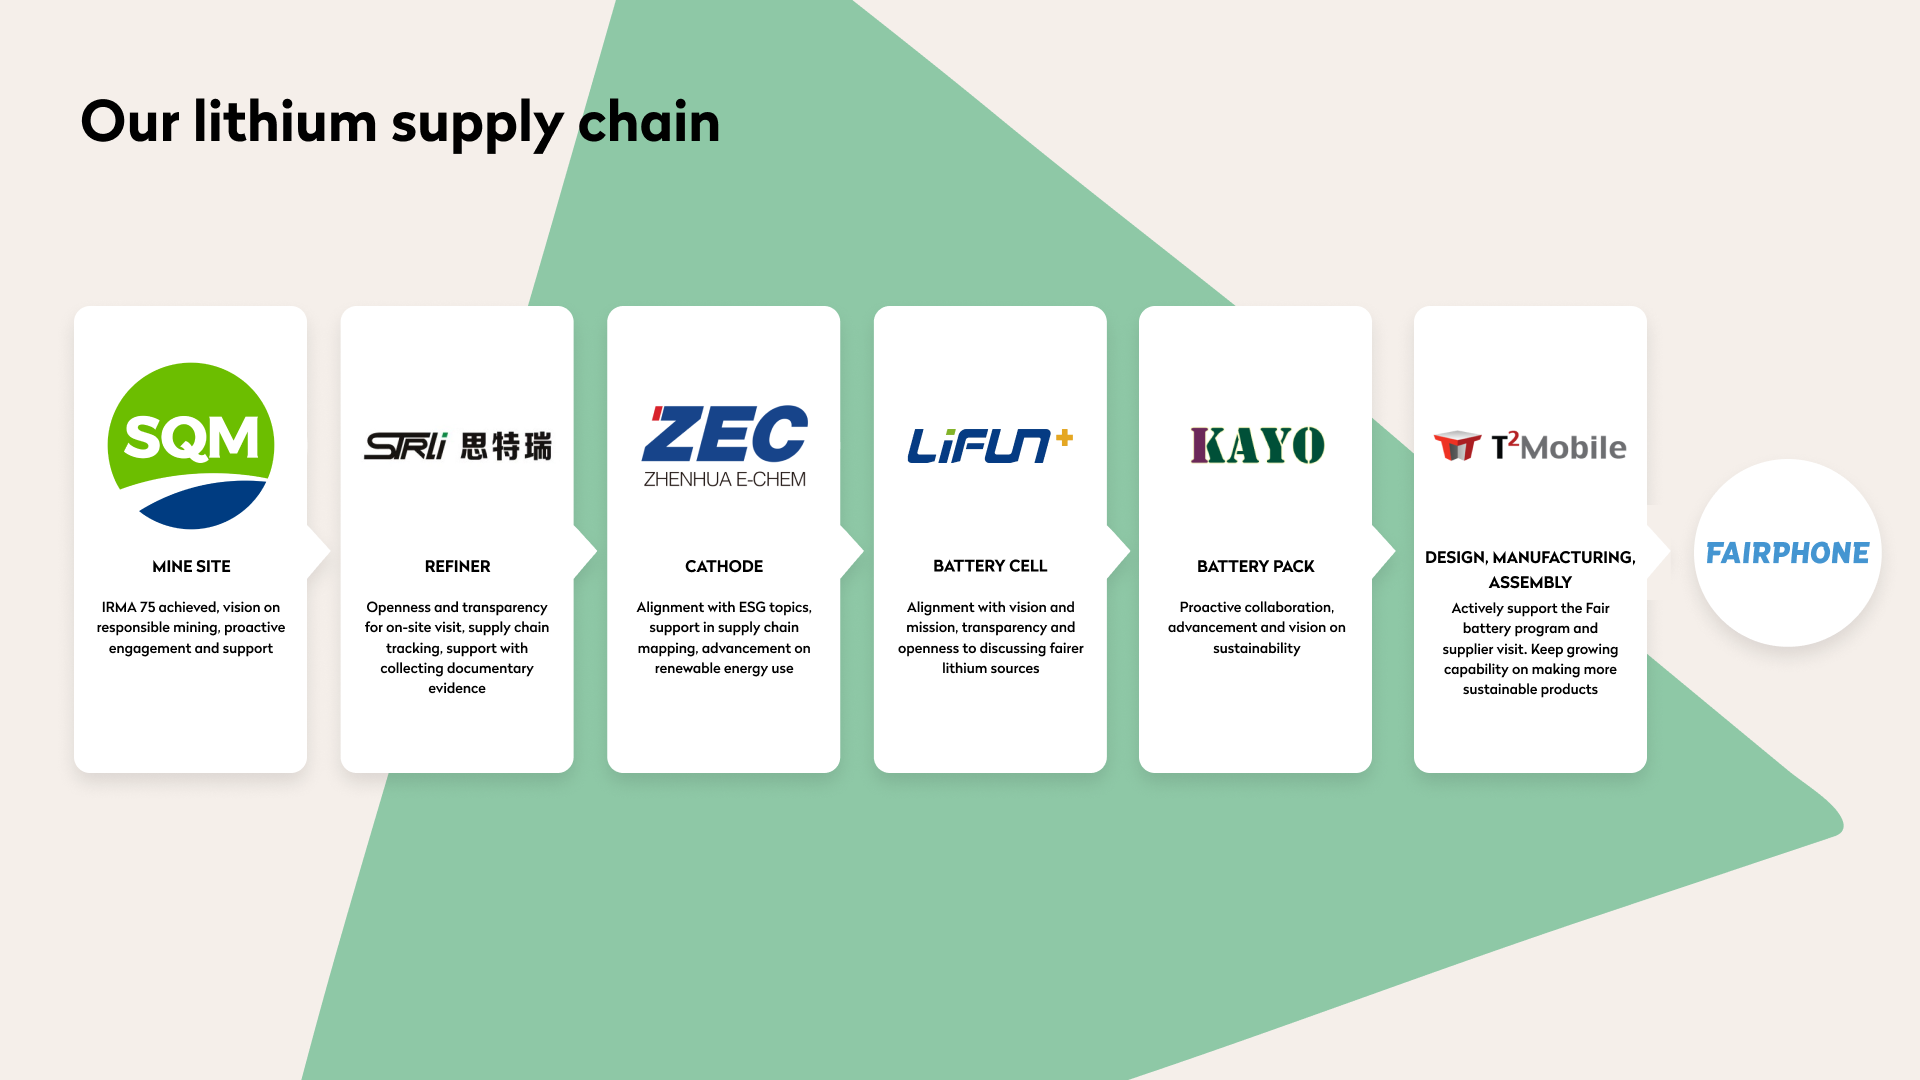 Our lithium supply chain